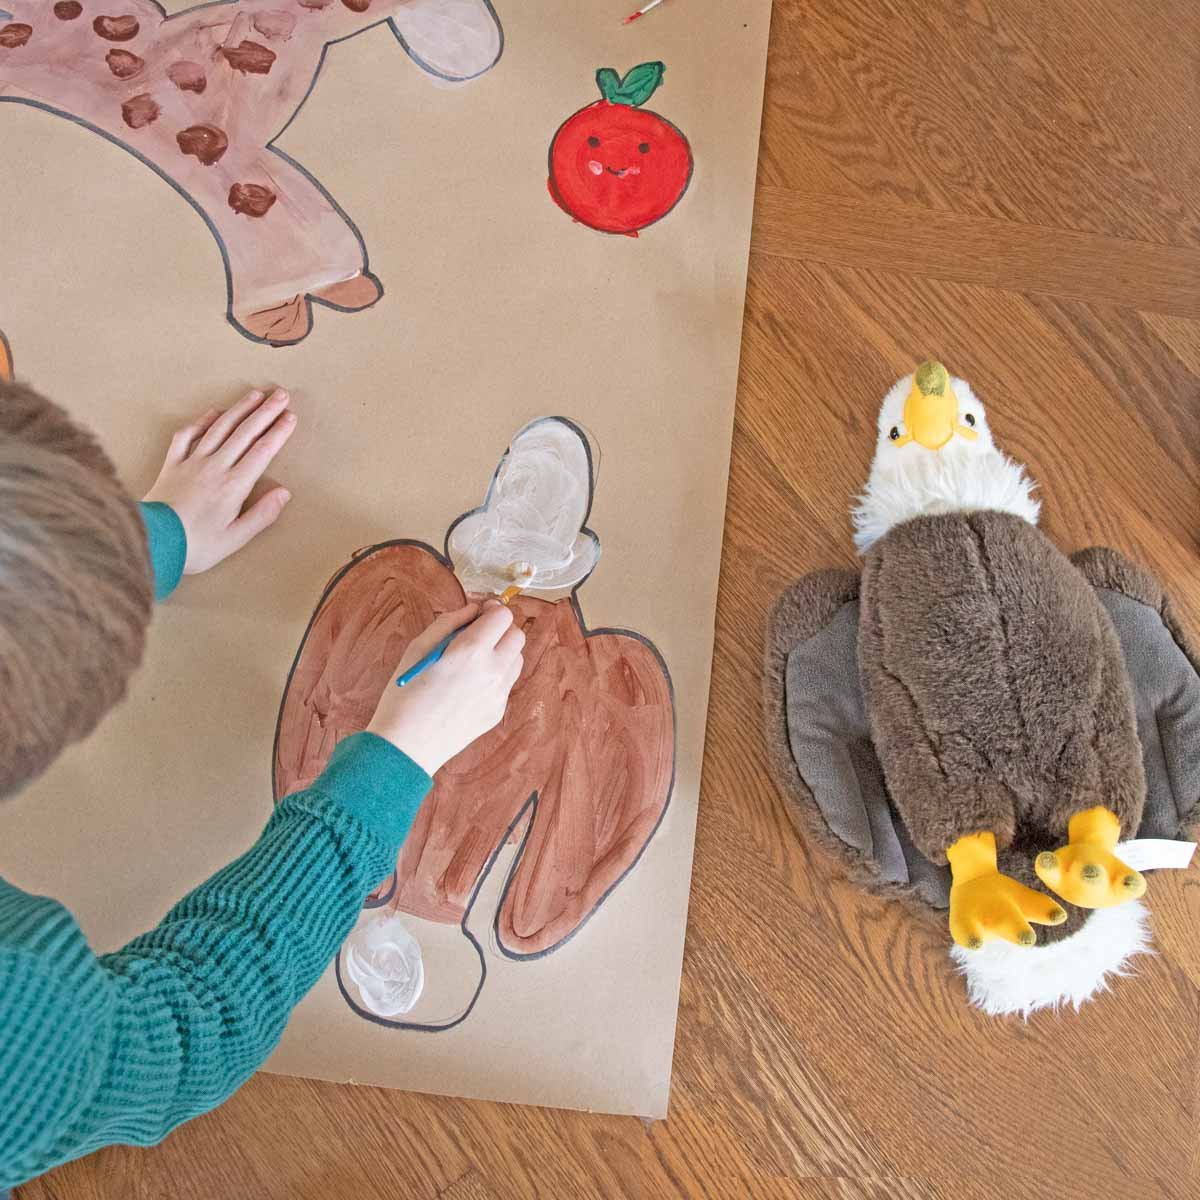 A child paints a portrait of their eagle stuffed animal. There is a smiling apple picture above him.